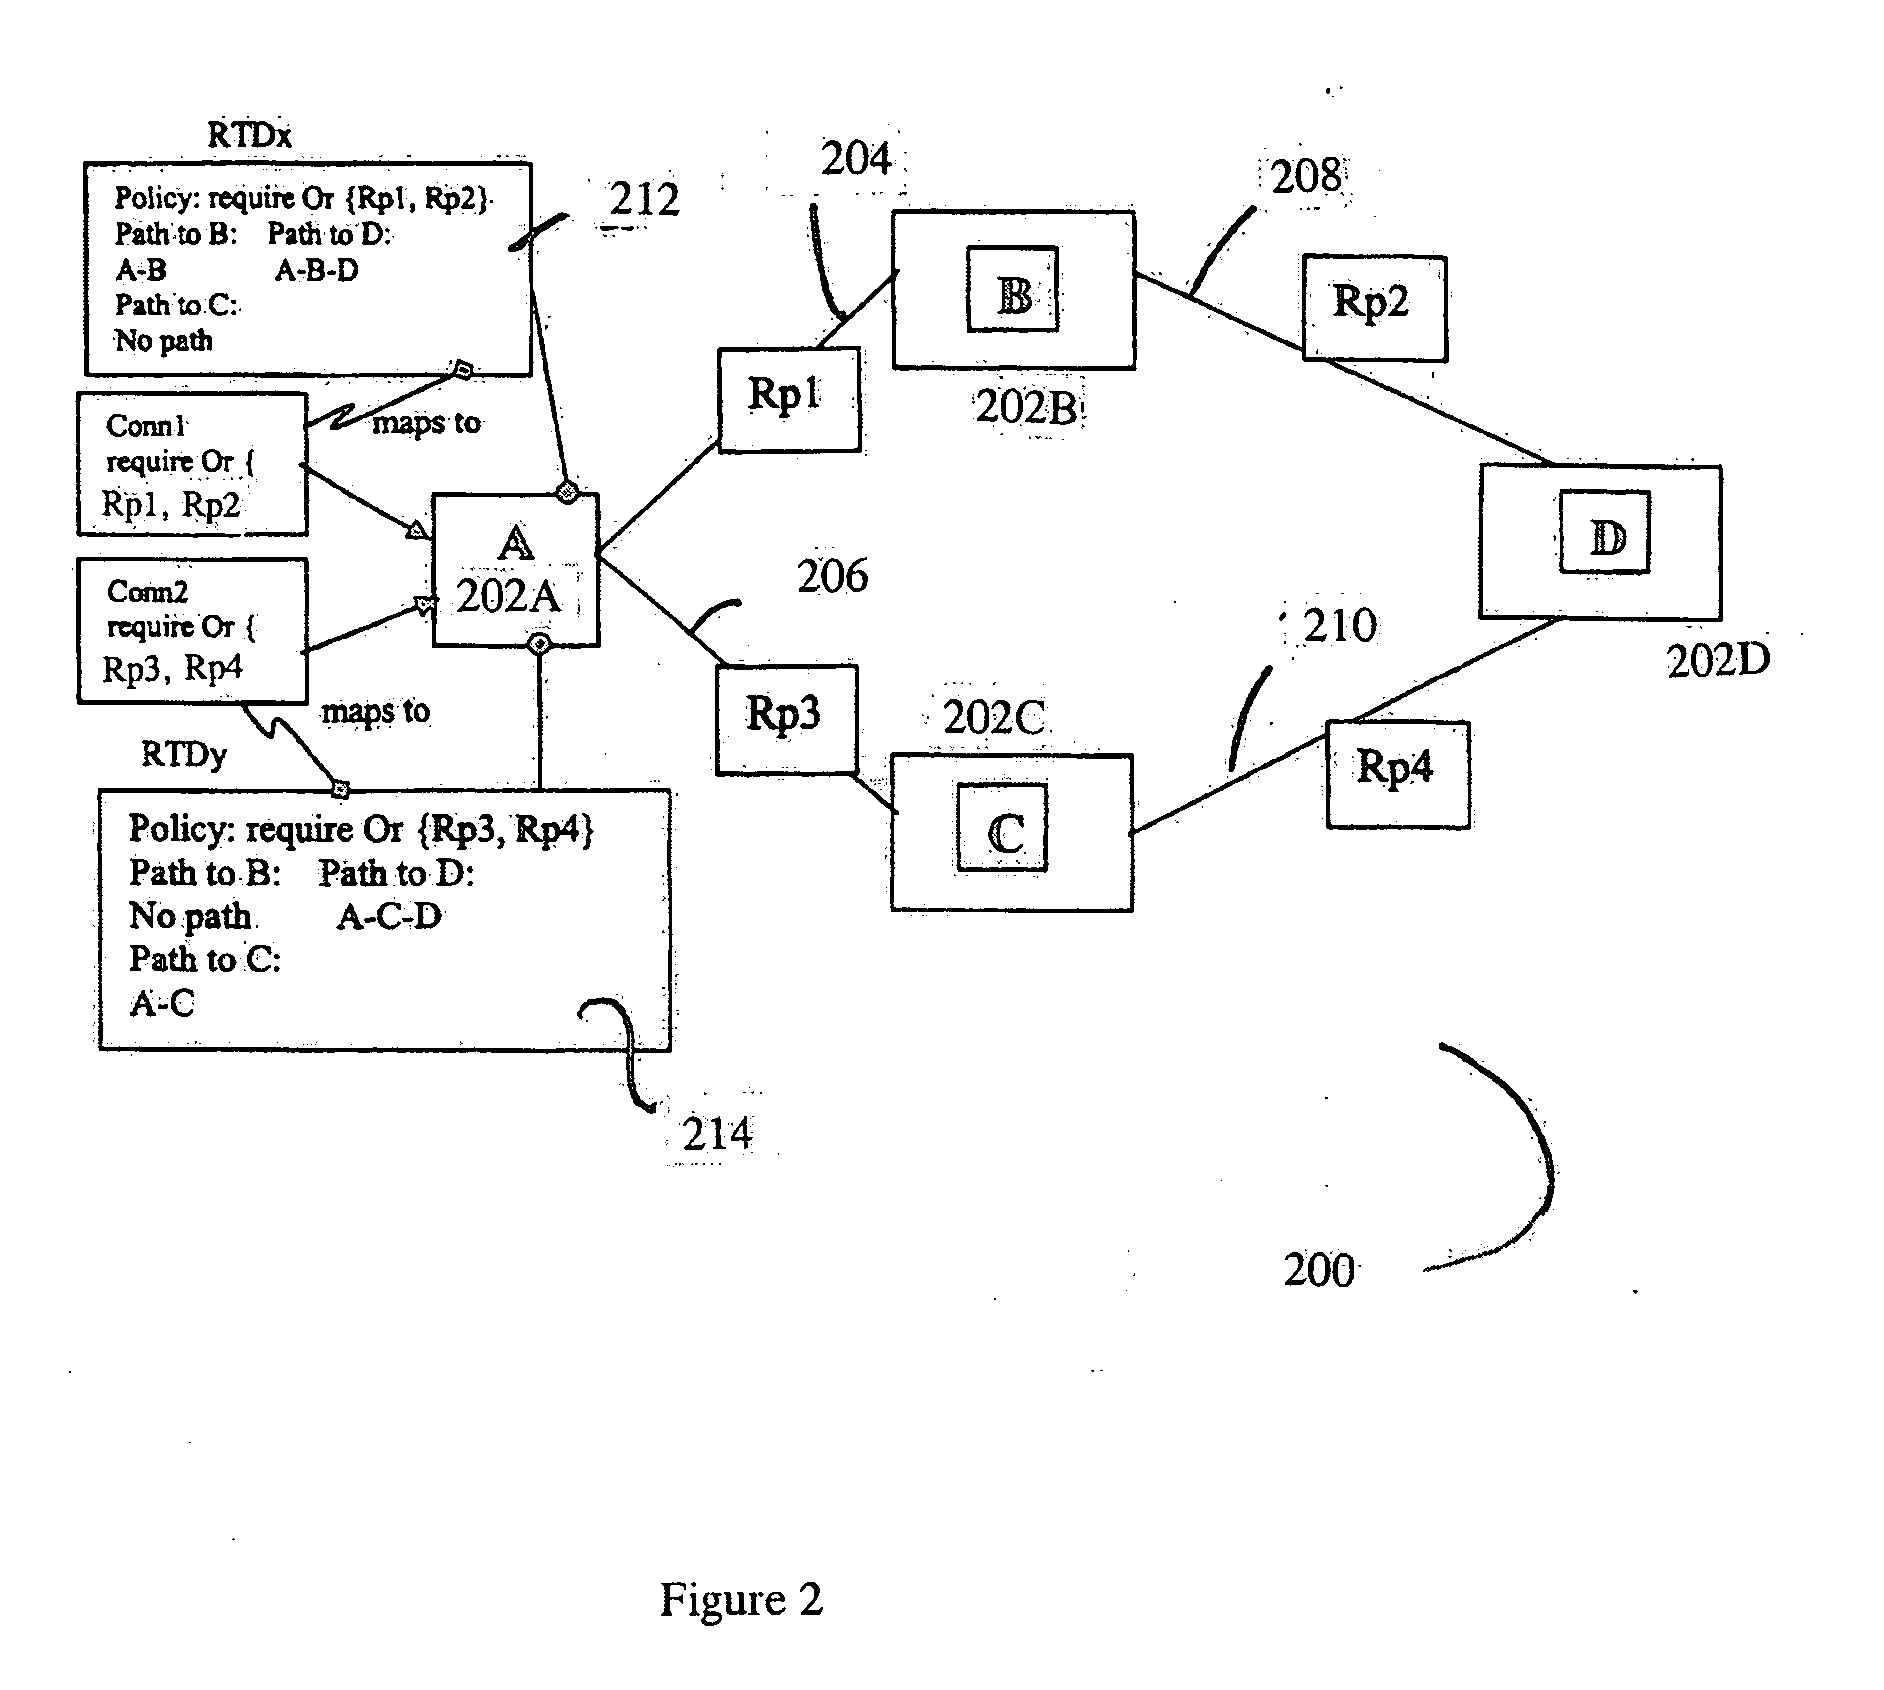 System and method for identifying pre-computed paths in a policy-based routing network